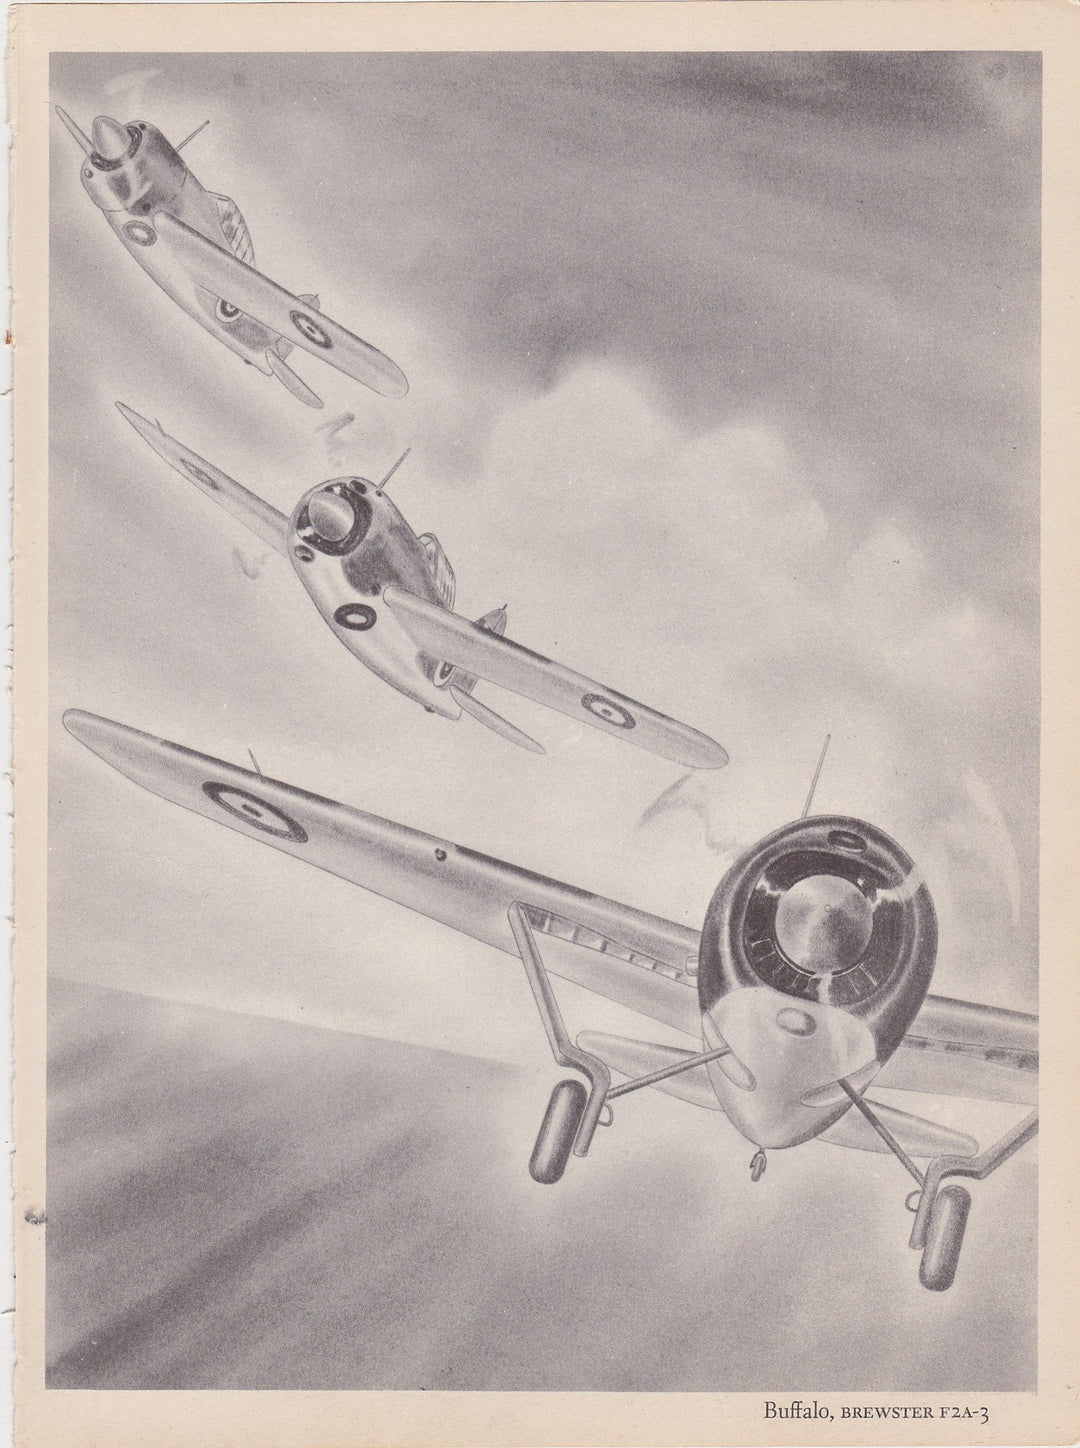 Buffalo Brewster F2A-3 Fighter Planes Military Aircraft Vintage WWII Illustration Print 1944